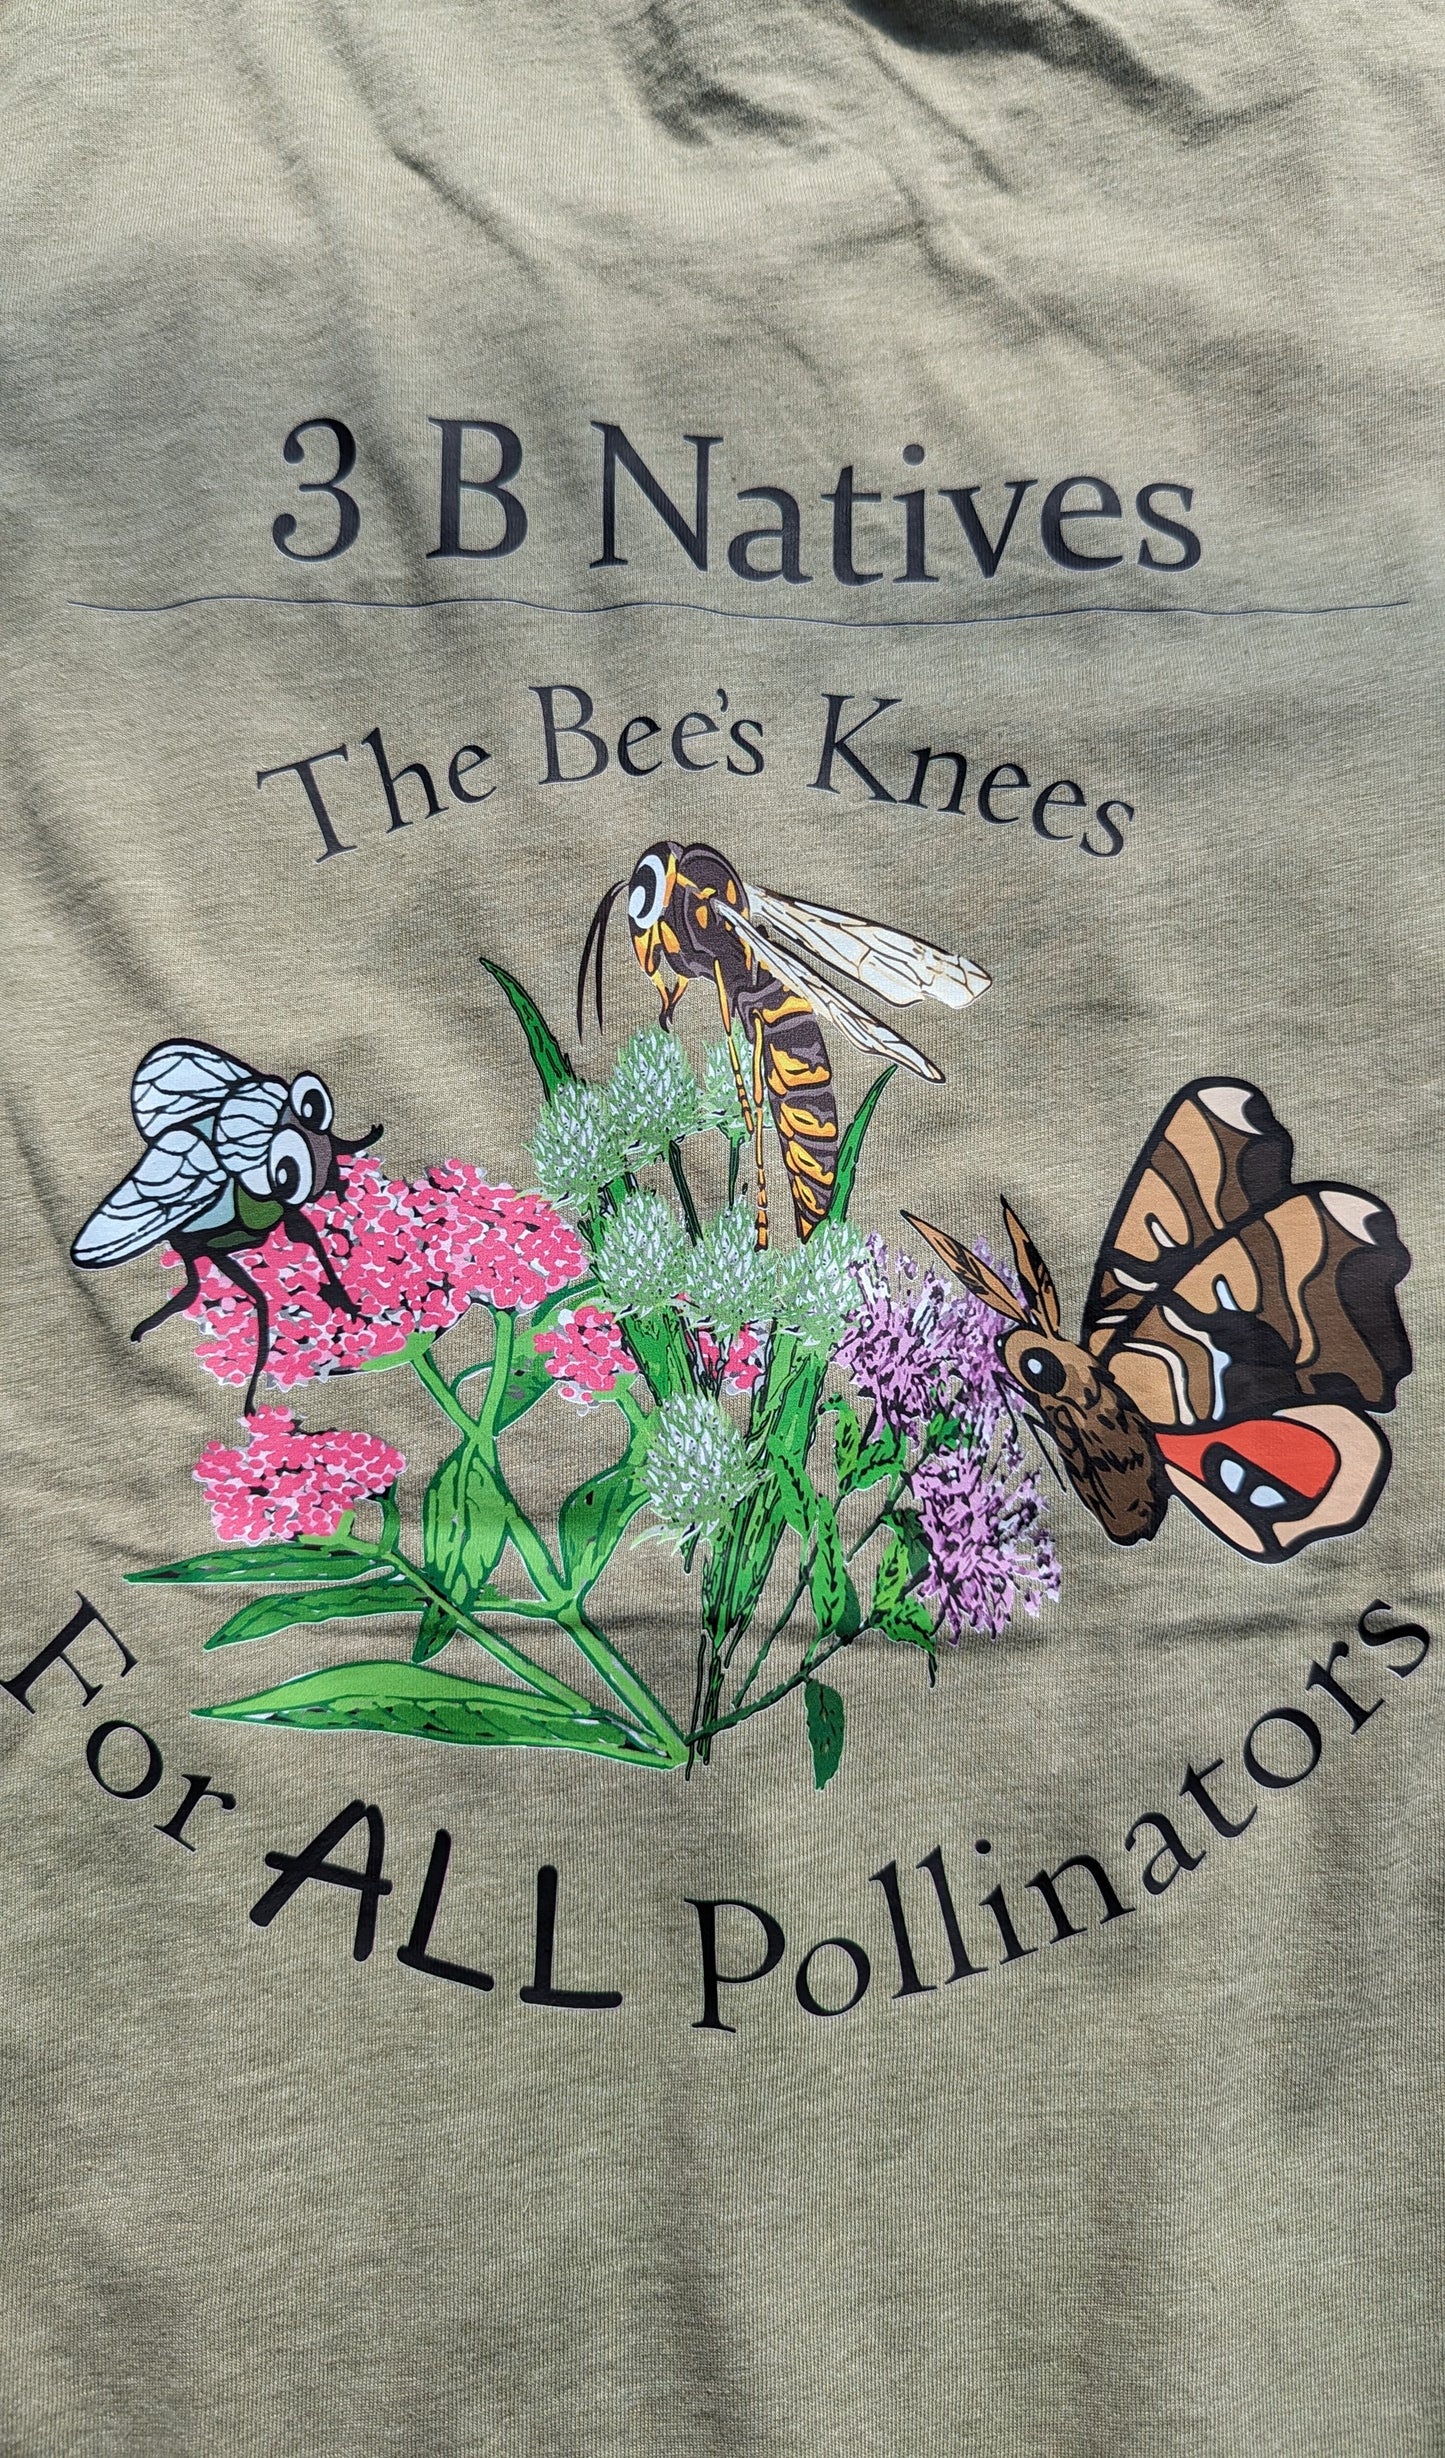 The Bees Knees Olive T-Shirt from 3 B Natives